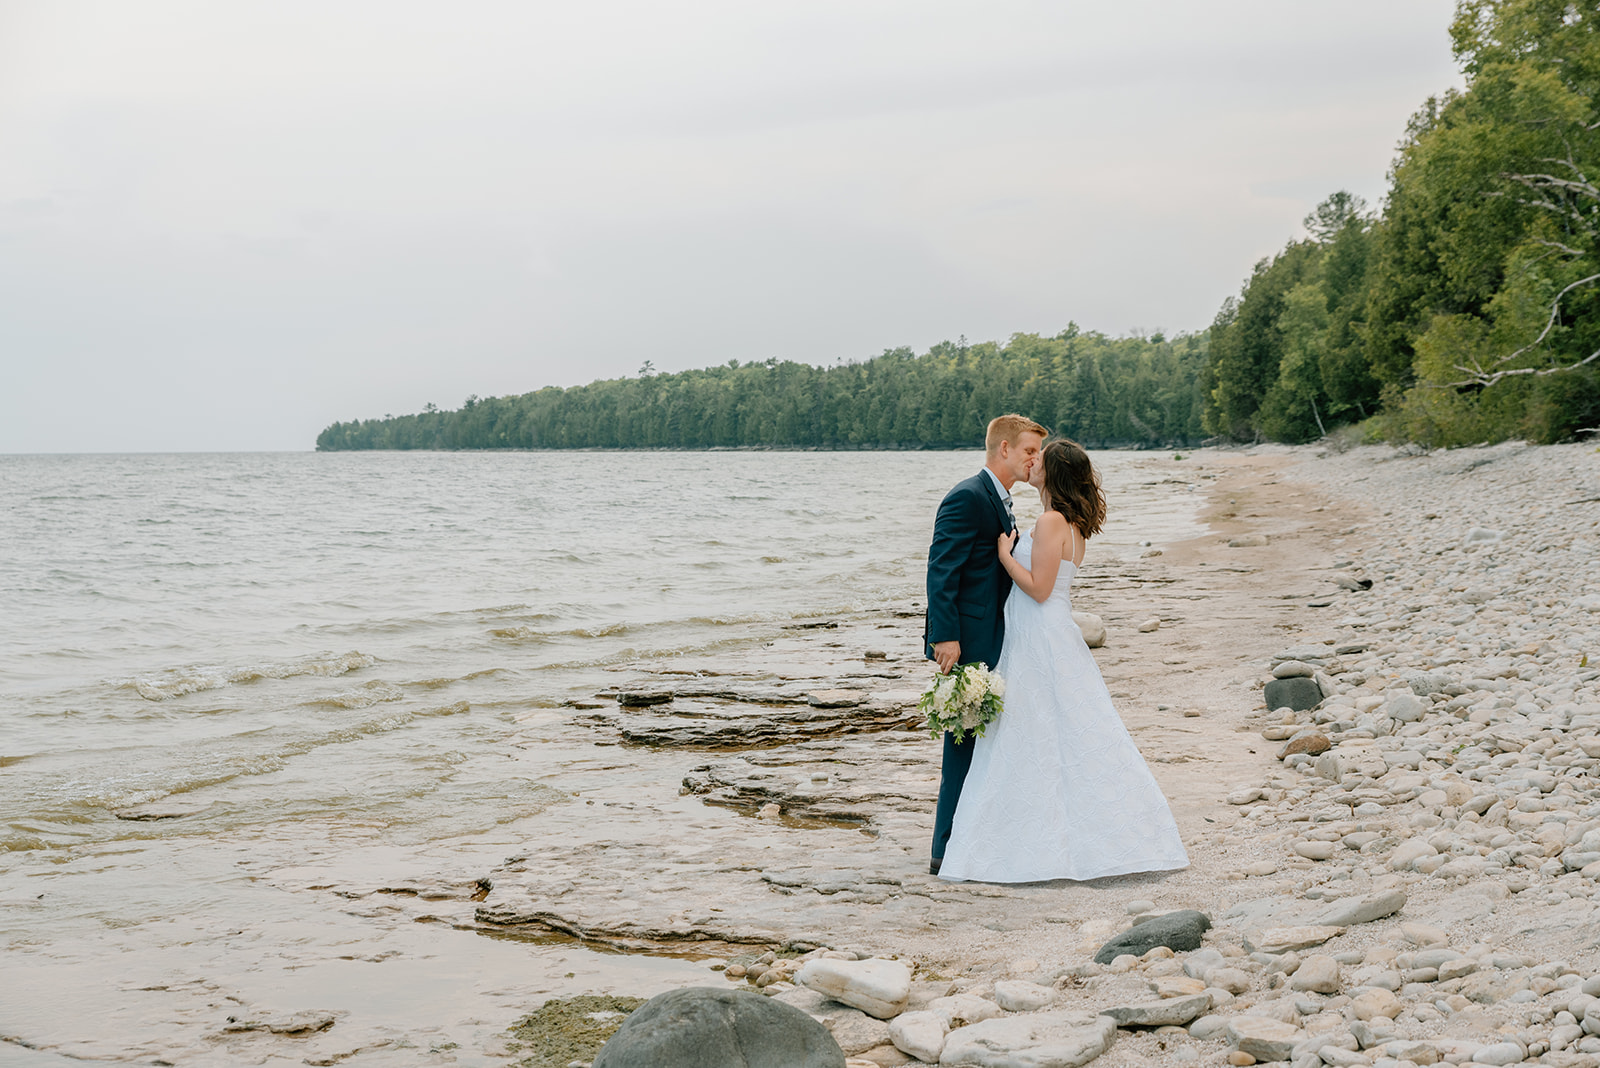 Door County vow renewal on the rocky Lake Michigan shoreline husband and wife share quiet moment